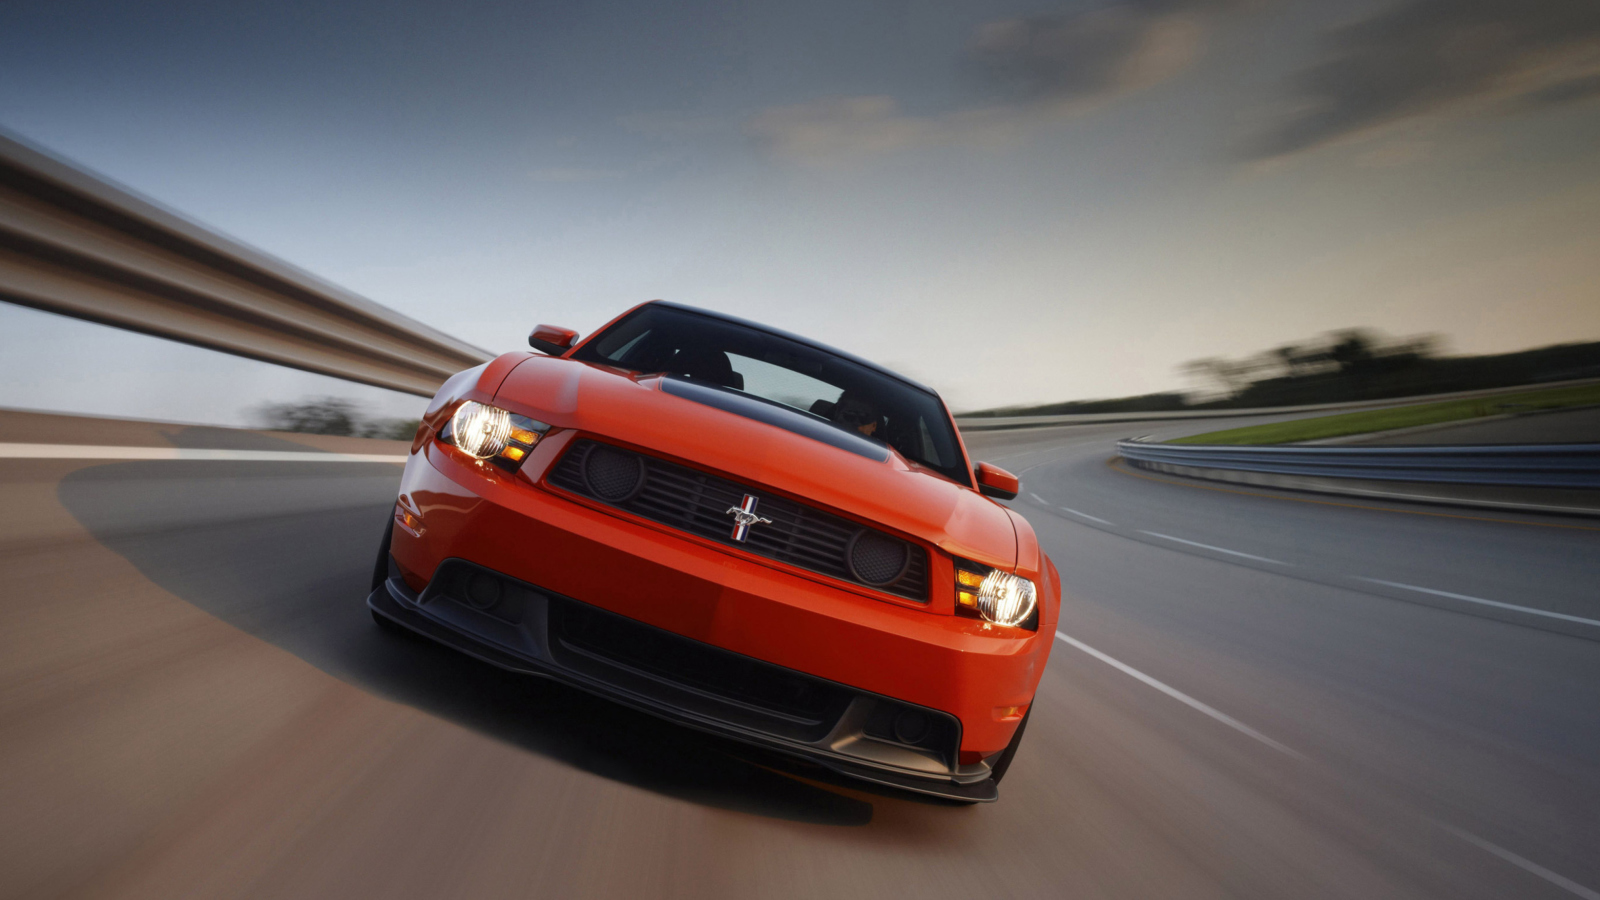 Red Cars Ford Mustang wallpaper 1600x900